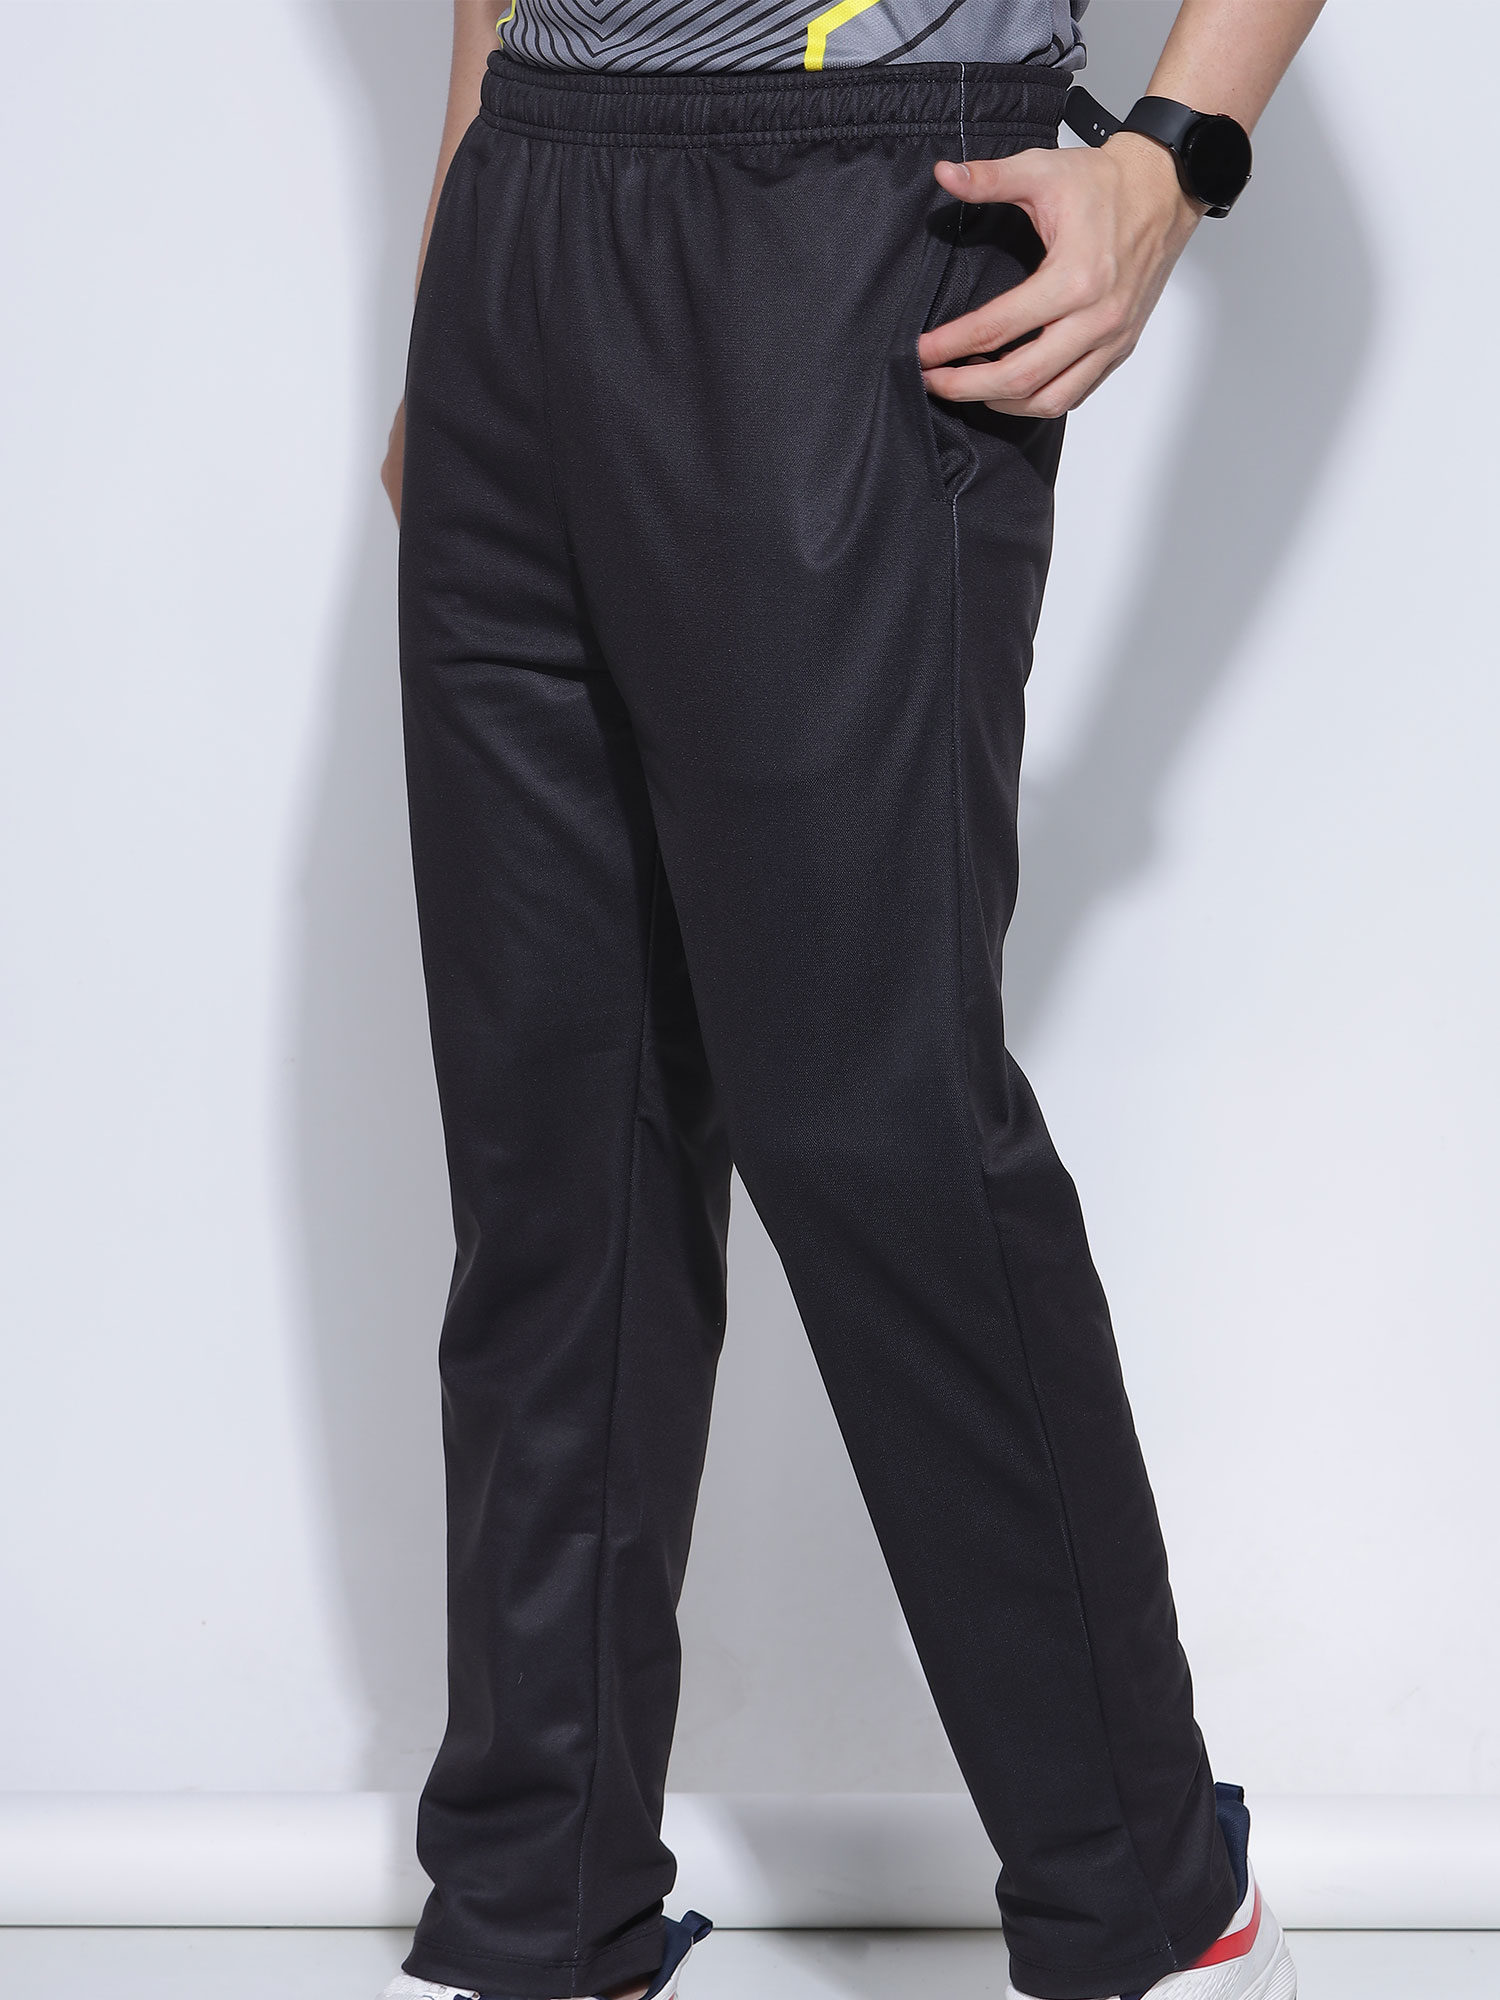 Cotton Track Pant Size  L M S XL XXL Feature  Anti Wrinkle Elegant  Look Skin Friendly at Rs 200  Piece in Delhi